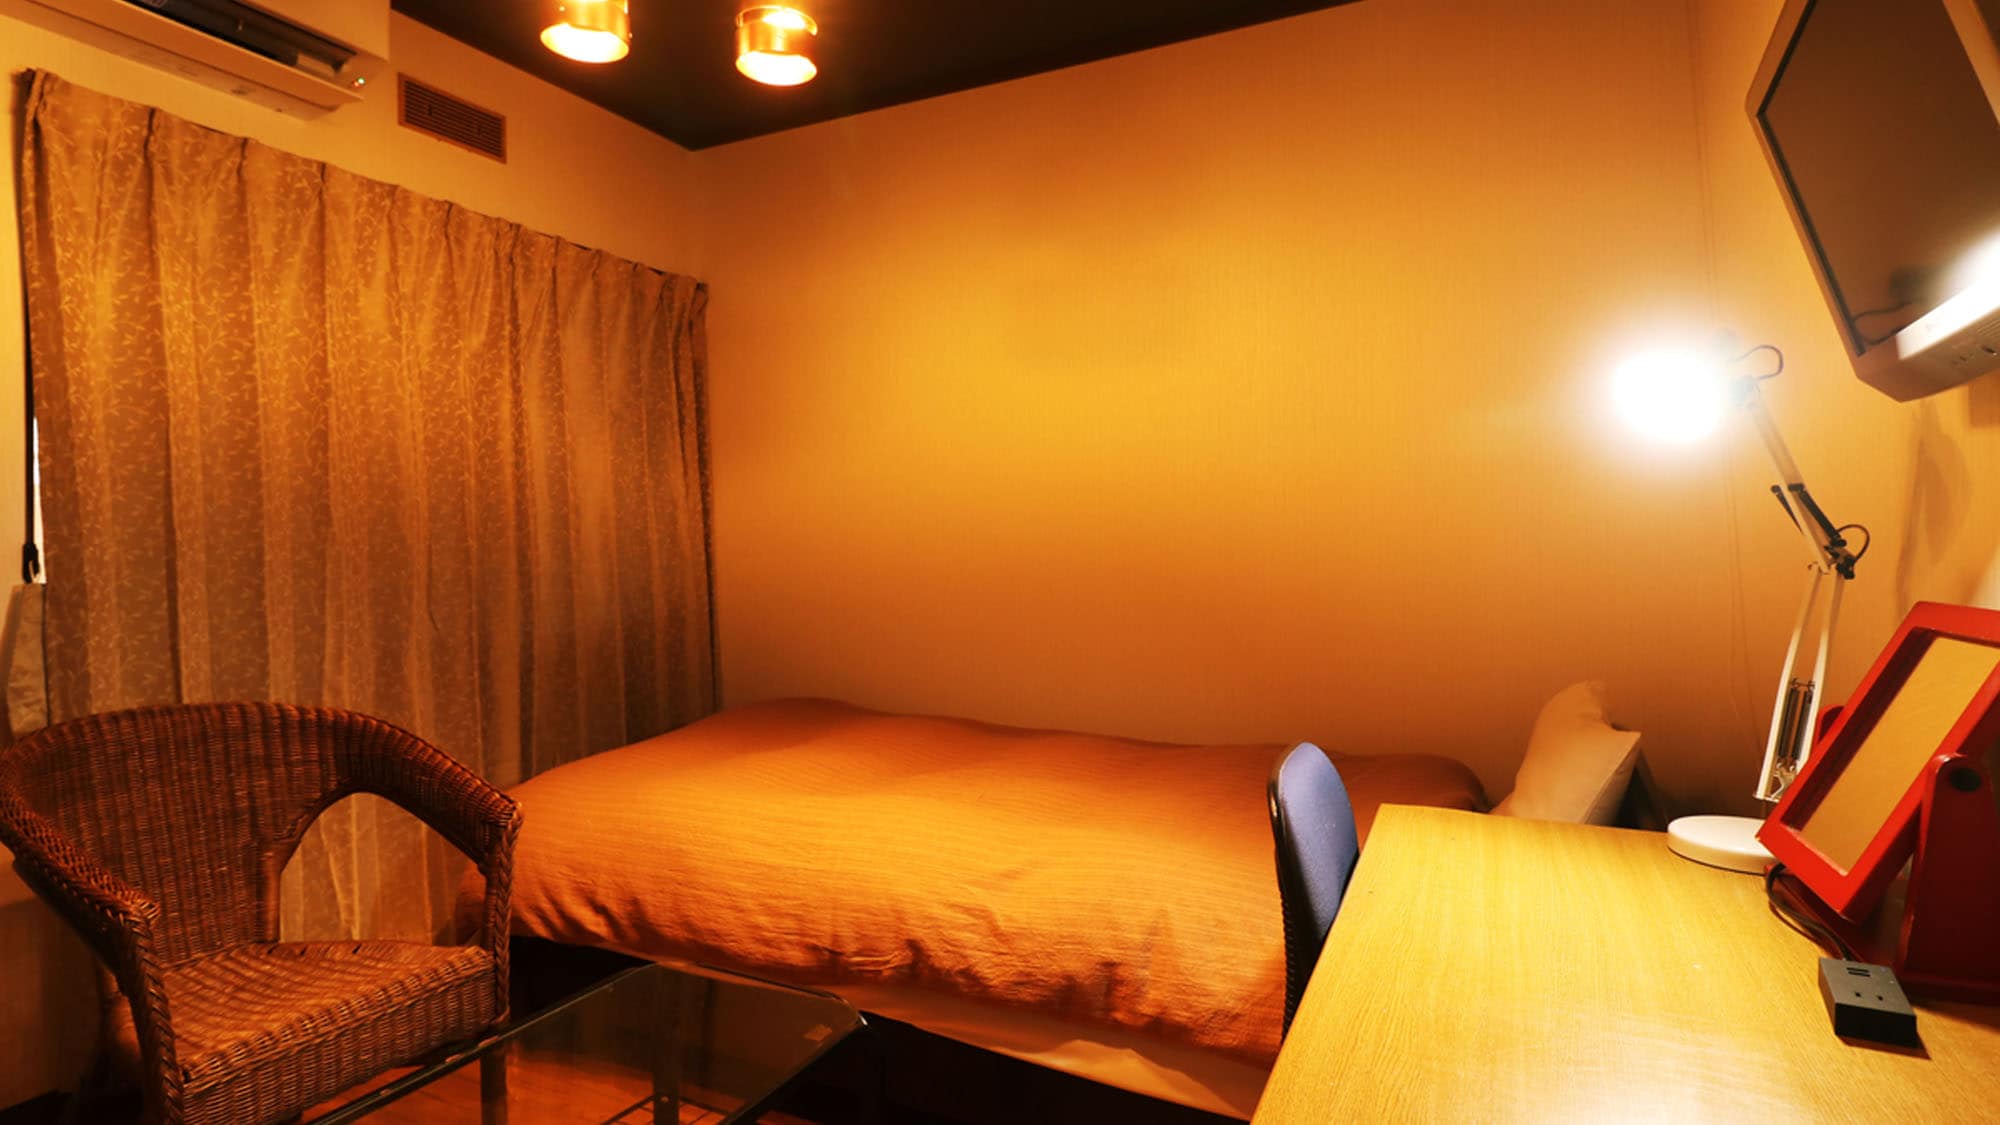 # [Single] Simple room. This room is ideal for business travelers and solo travelers.